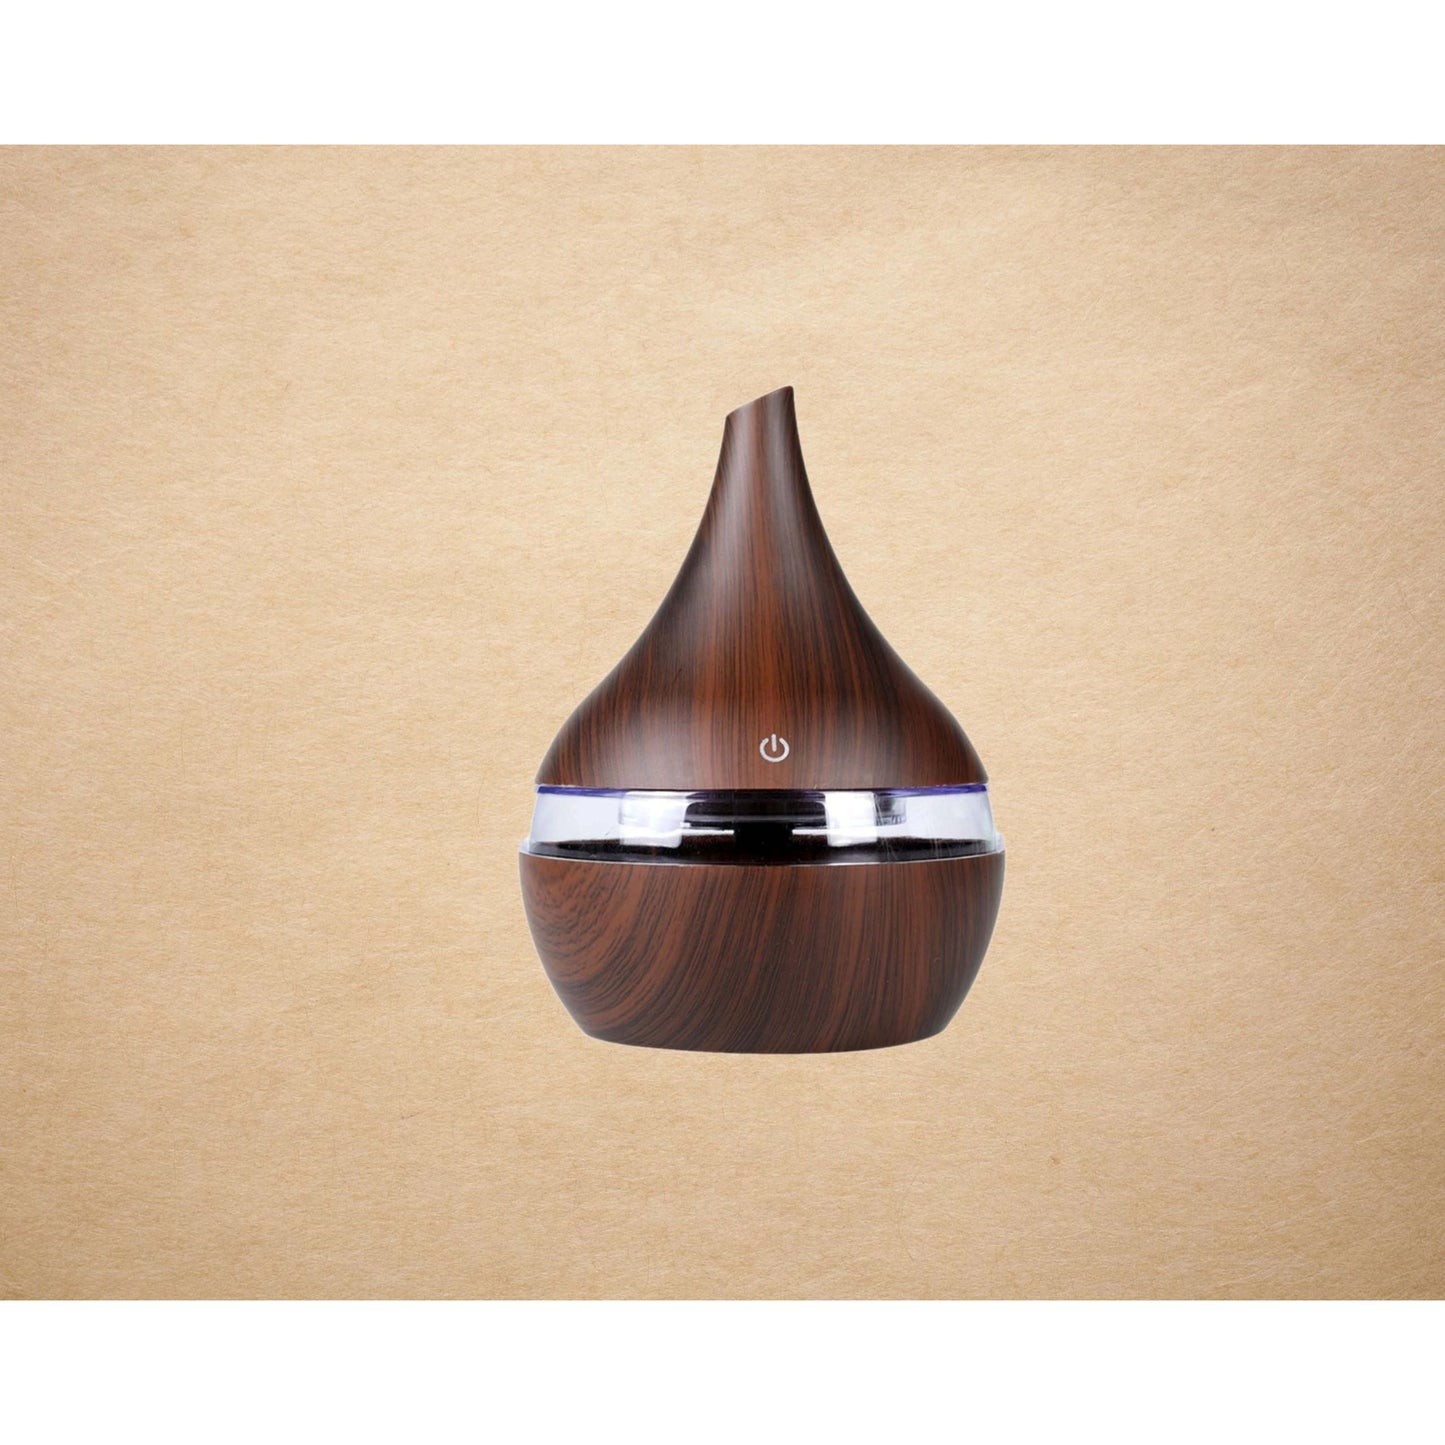 Essential Oil Diffuser with 7 Colors of LED Lights